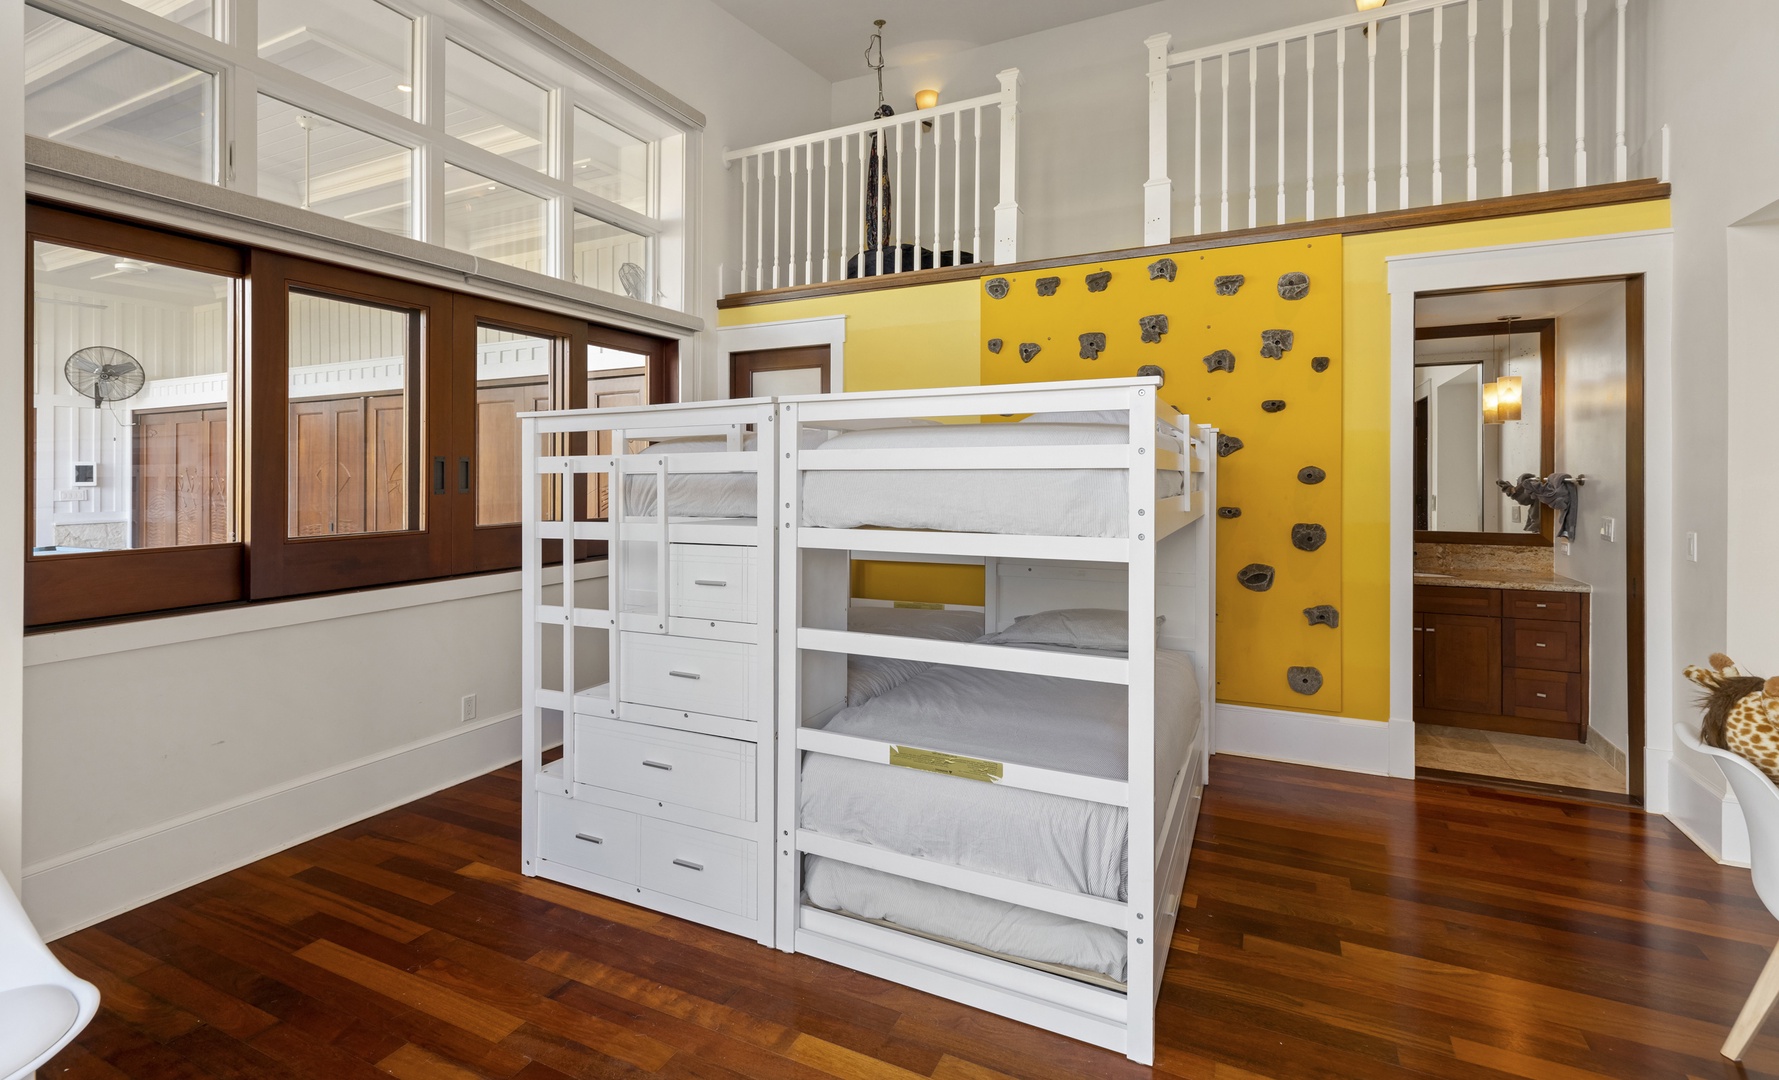 Kailua Vacation Rentals, Lanikai Villa* - Guest Bedroom 4 with two twins and two doubles - A perfect space for the kids!